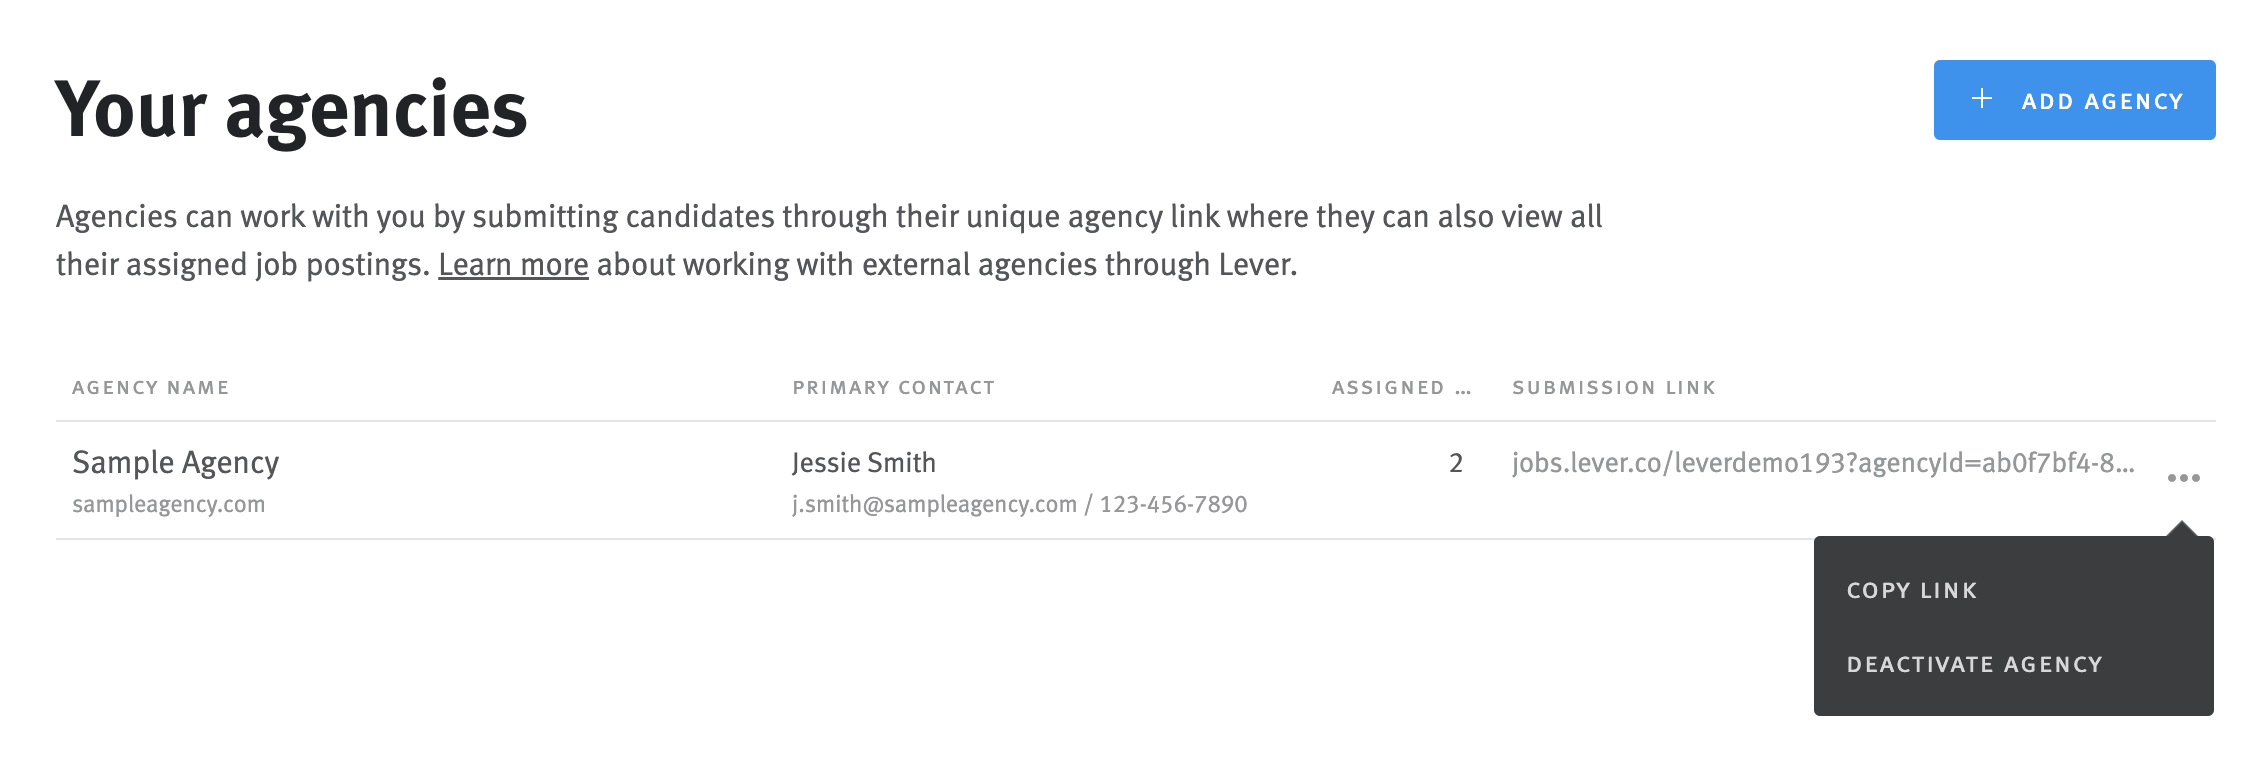 Menu extending from agency in agency list with options to copy link and deactivate agency.